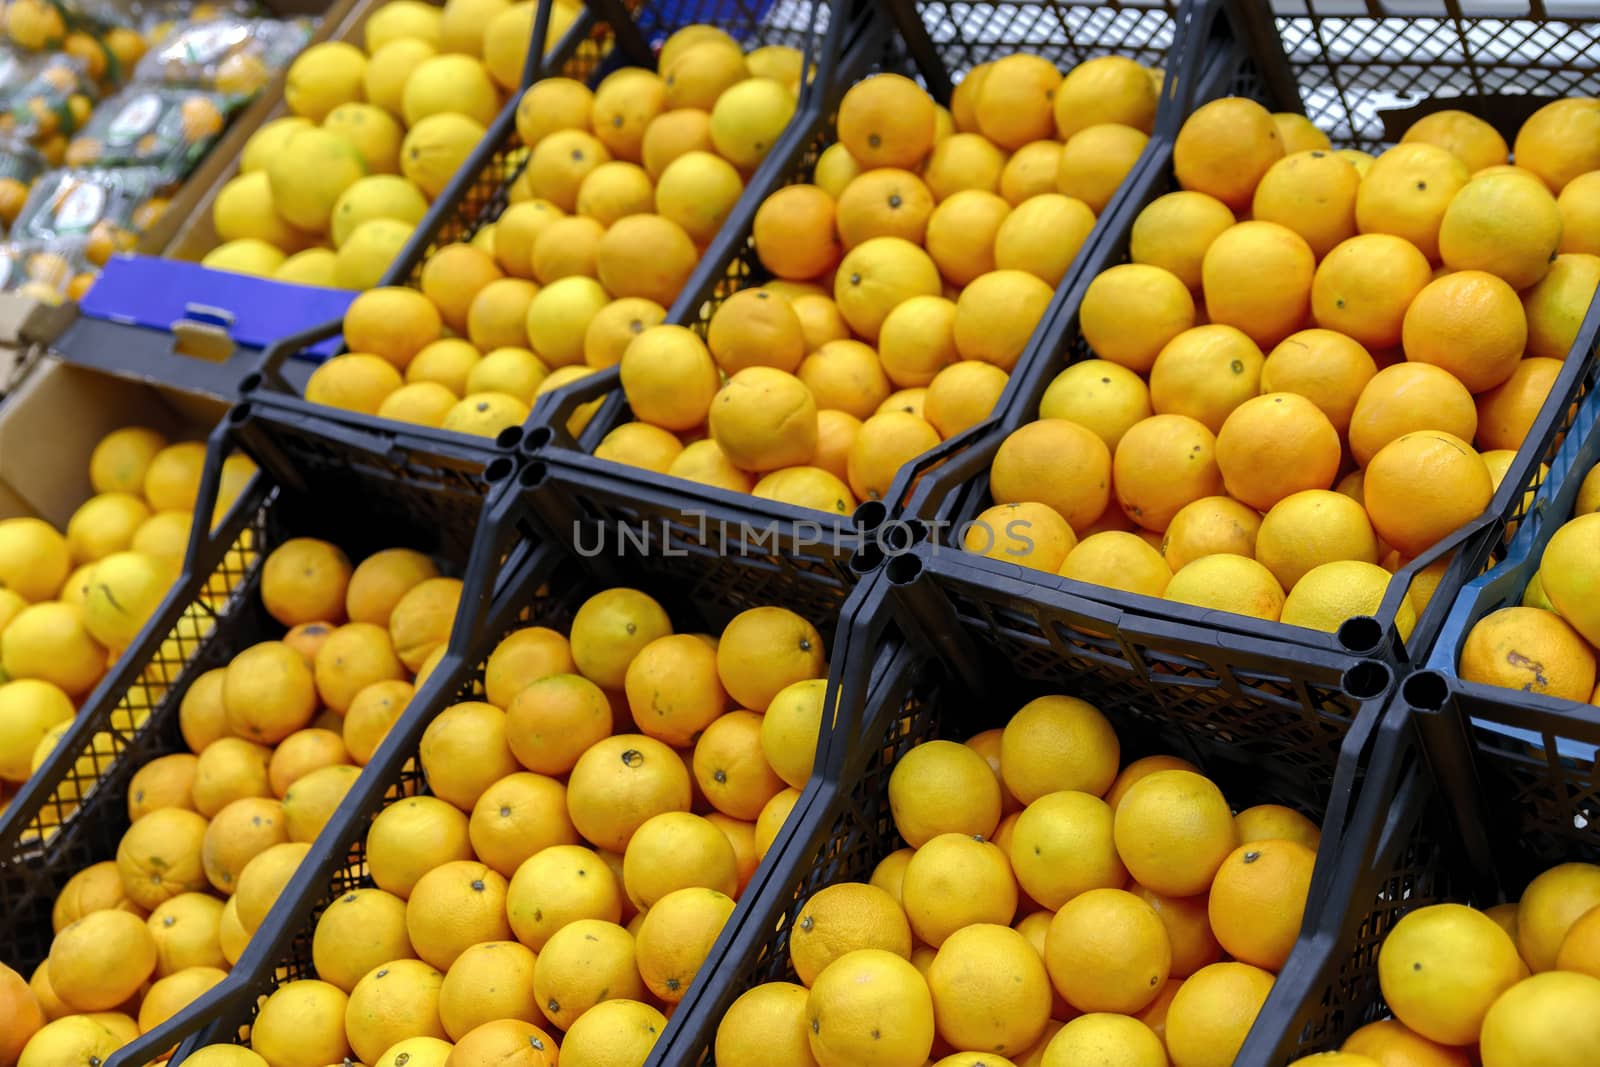 Oranges in the rack at the supermarket by bonilook